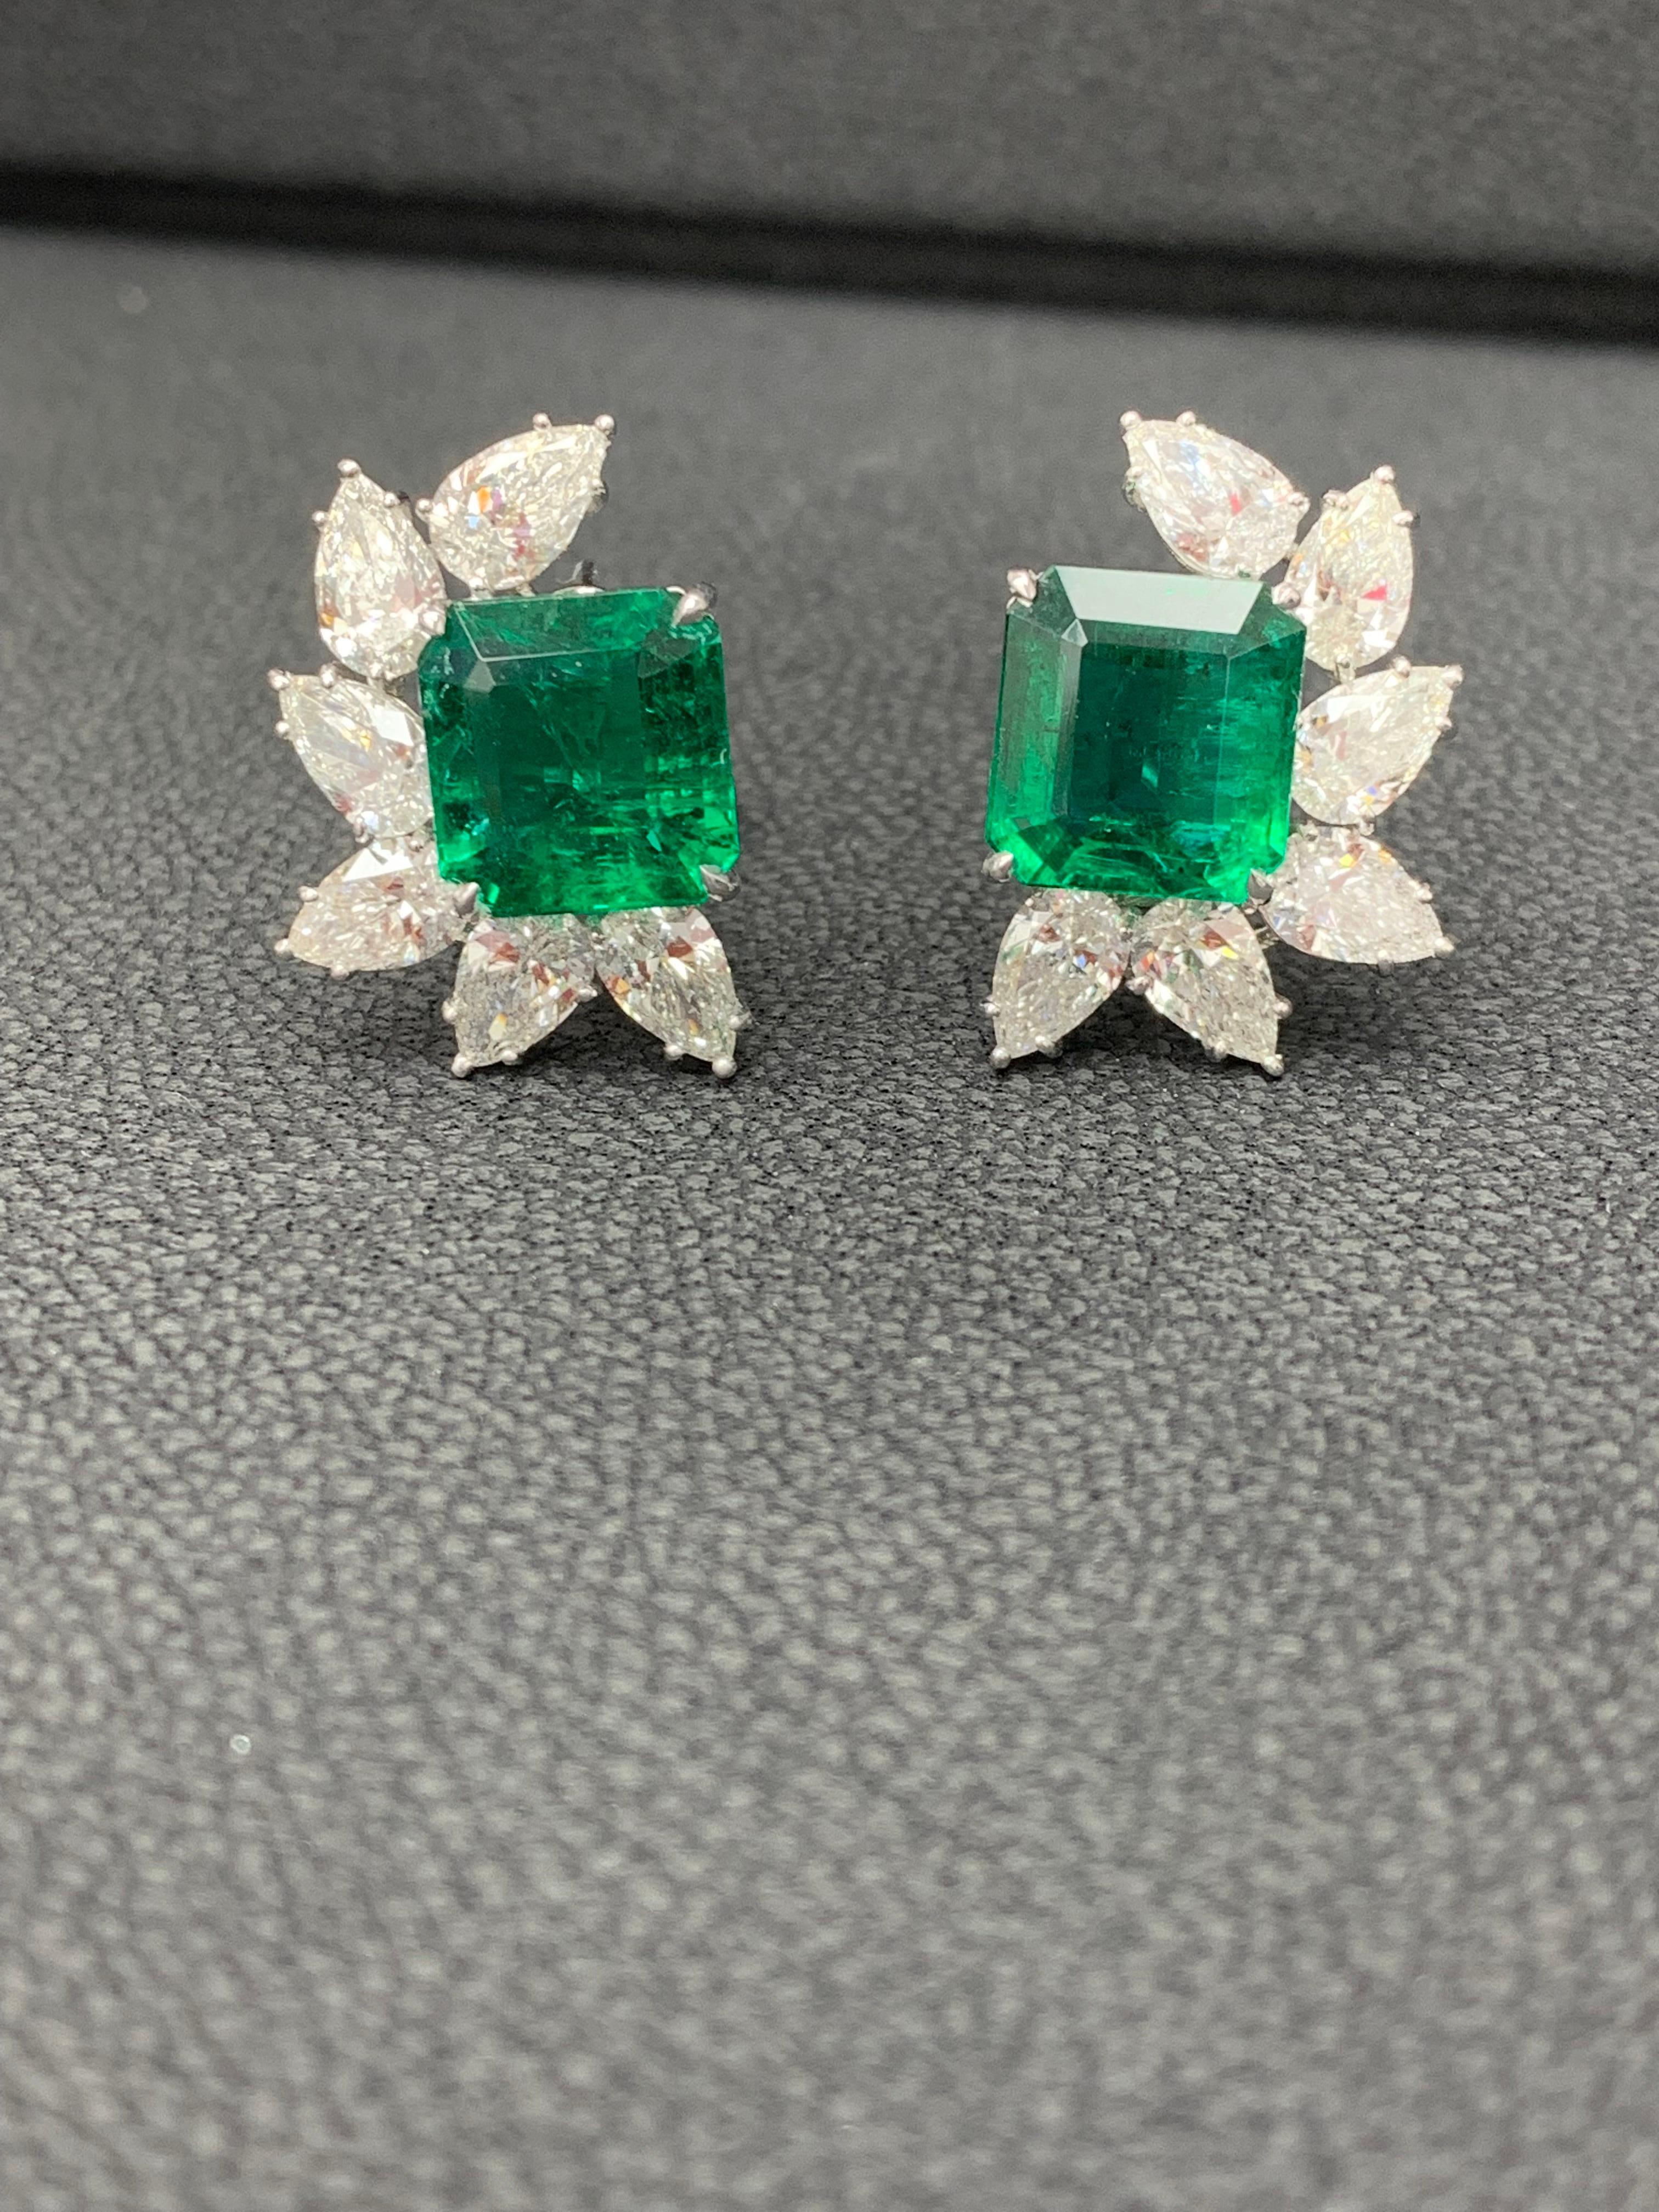 Certified 7.82 Carat Emerald Cut Emerald and Diamond Cluster Earrings in 18K  For Sale 11